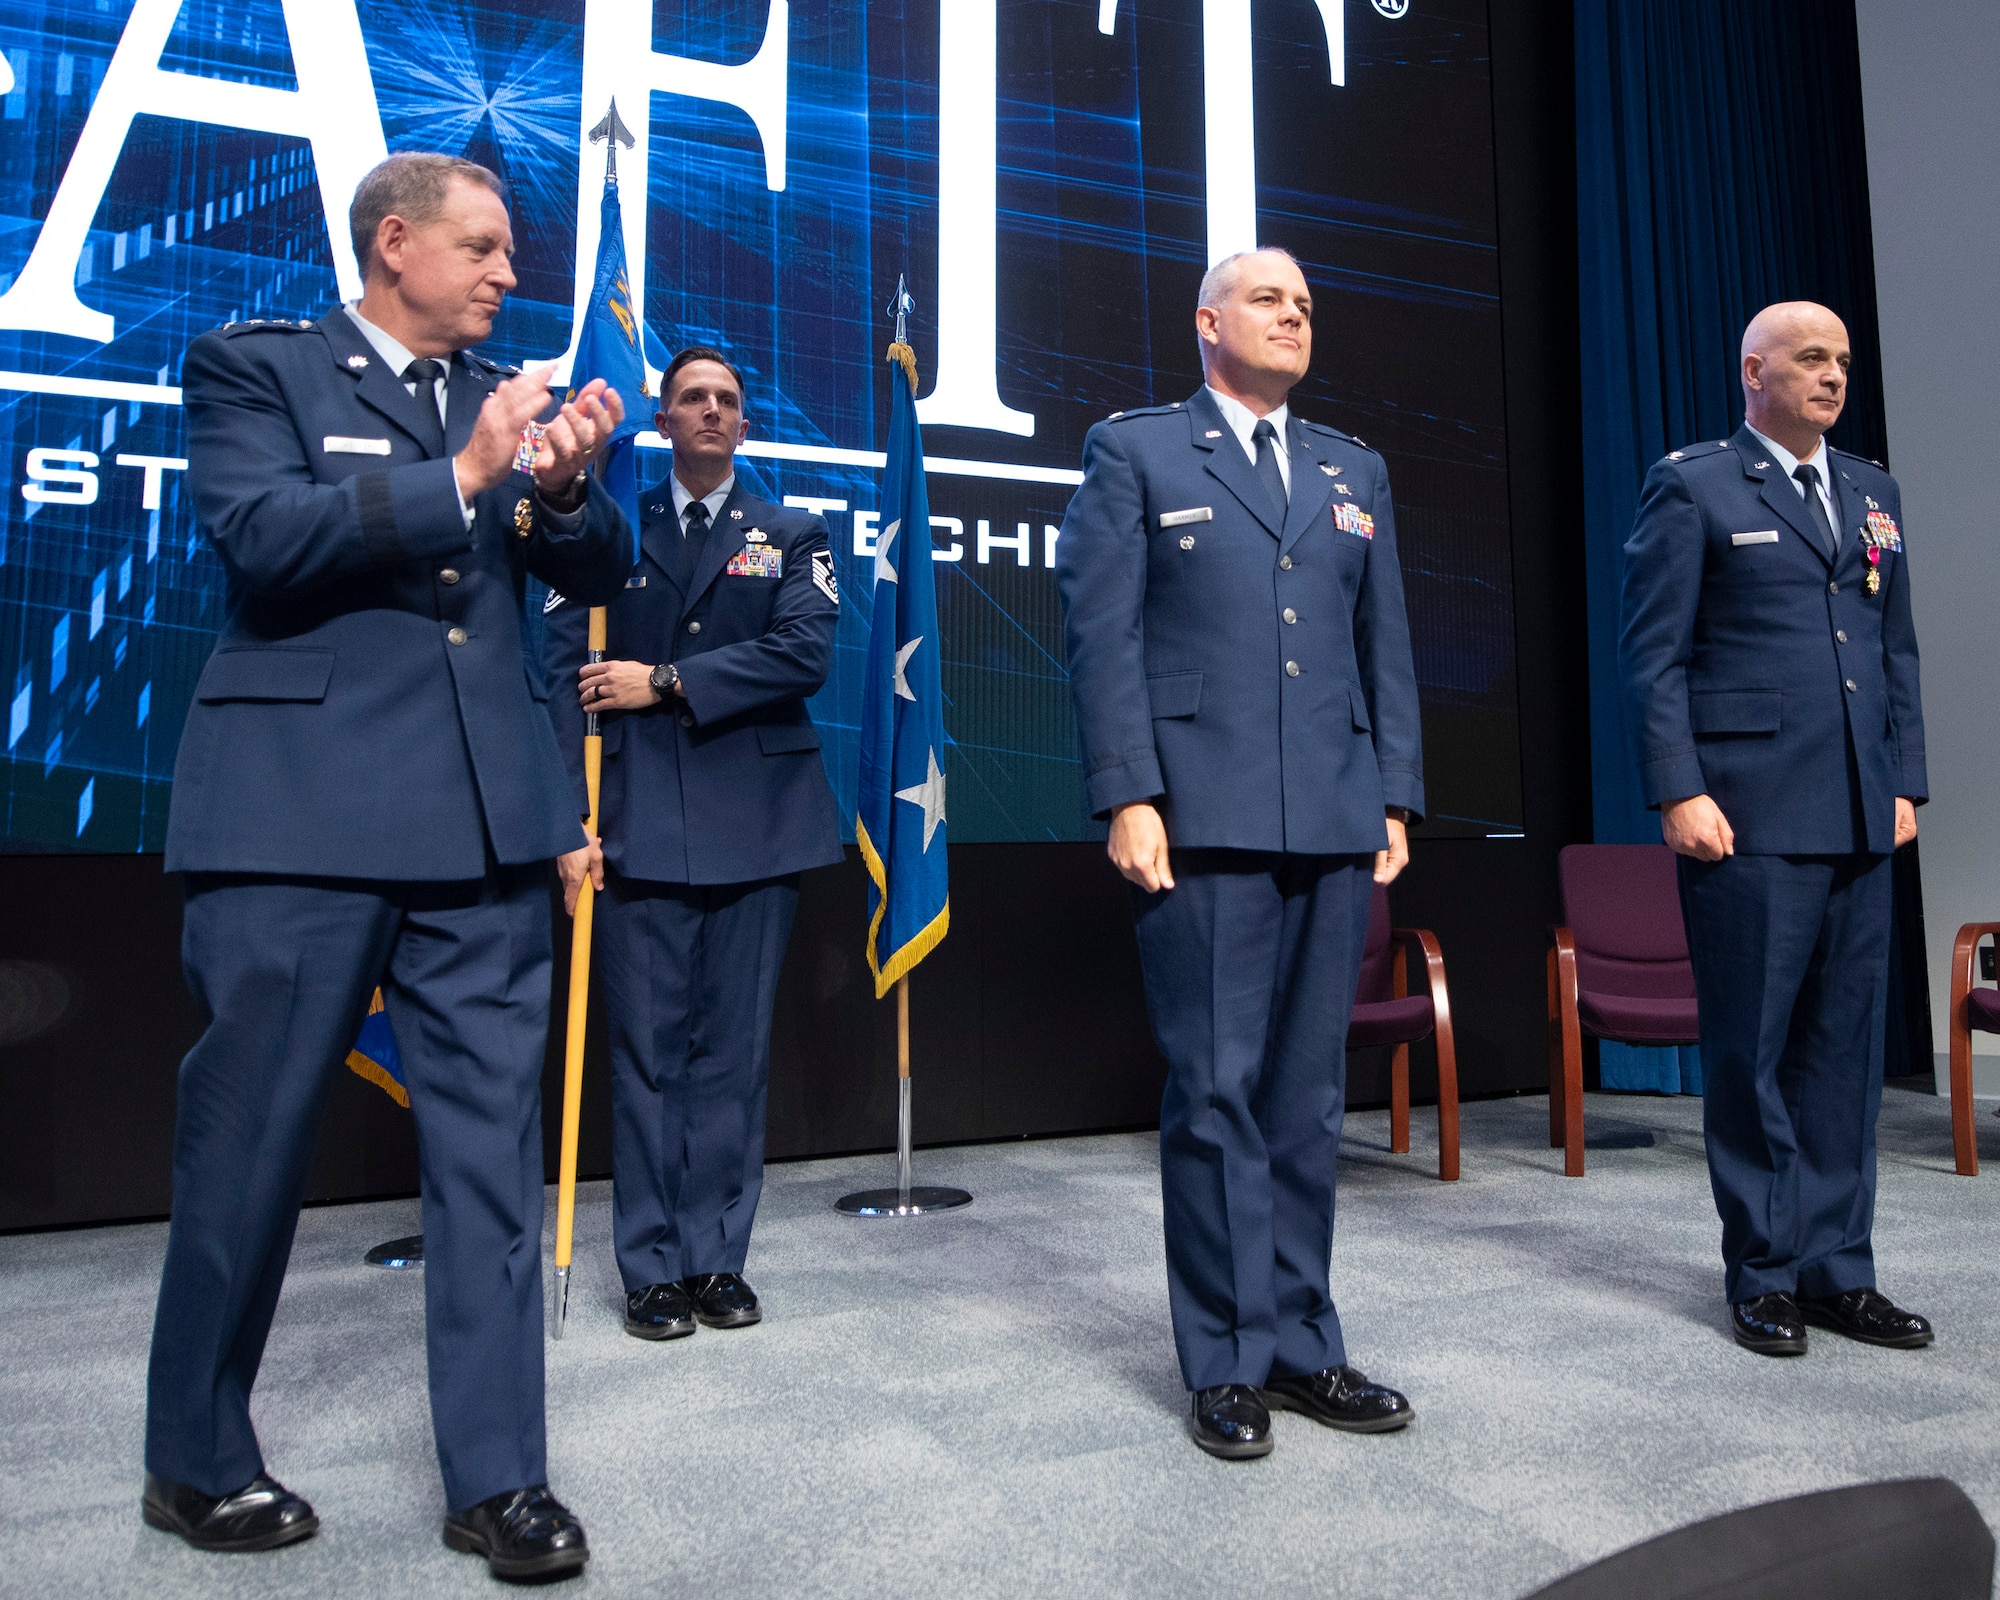 Col. Paul Harmer (center), Air University Detachment 1 commander at the Air Force Institute of Technology, receives applause from Lt. Gen. James Hecker, Air University commander and president, and the audience during a change-of-command ceremony July28 at the Wright-Patterson Air Force Base campus. Harmer assumes AFIT command from Col. Paul Cotellesso (right), who retired following 30 years of Air Force service. (U.S. Air Force photo by R.J. Oriez)